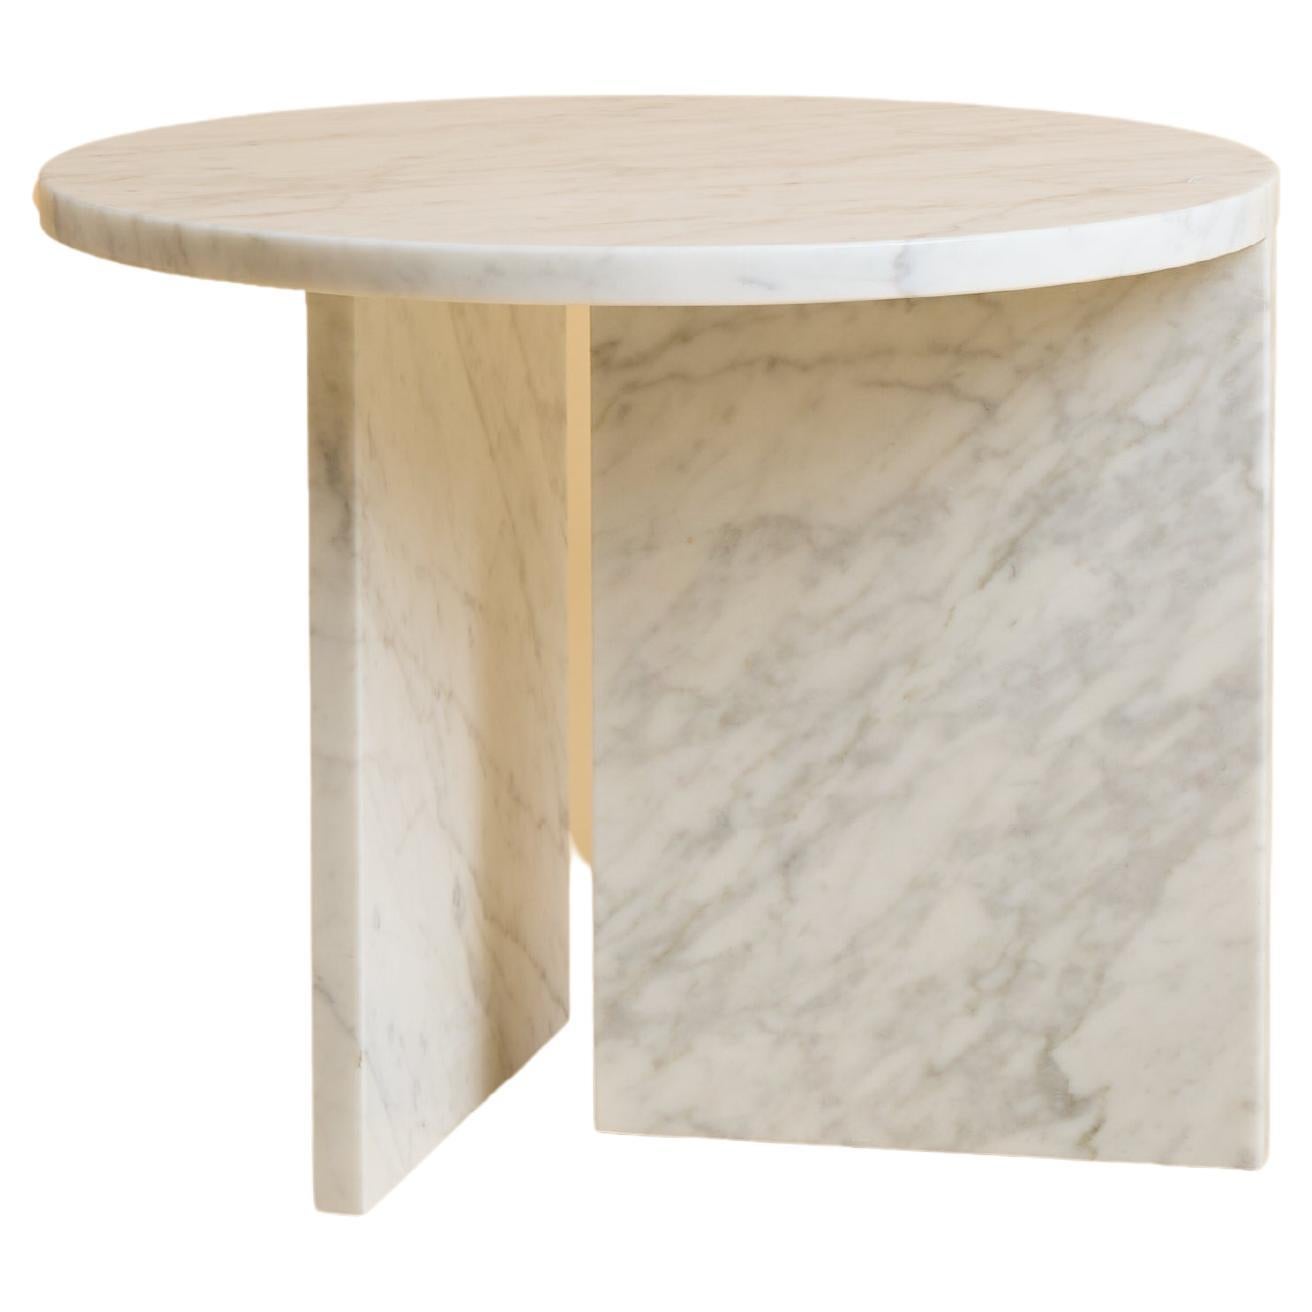 Carrara Marble Circular Coffee Table, Made in Italy For Sale